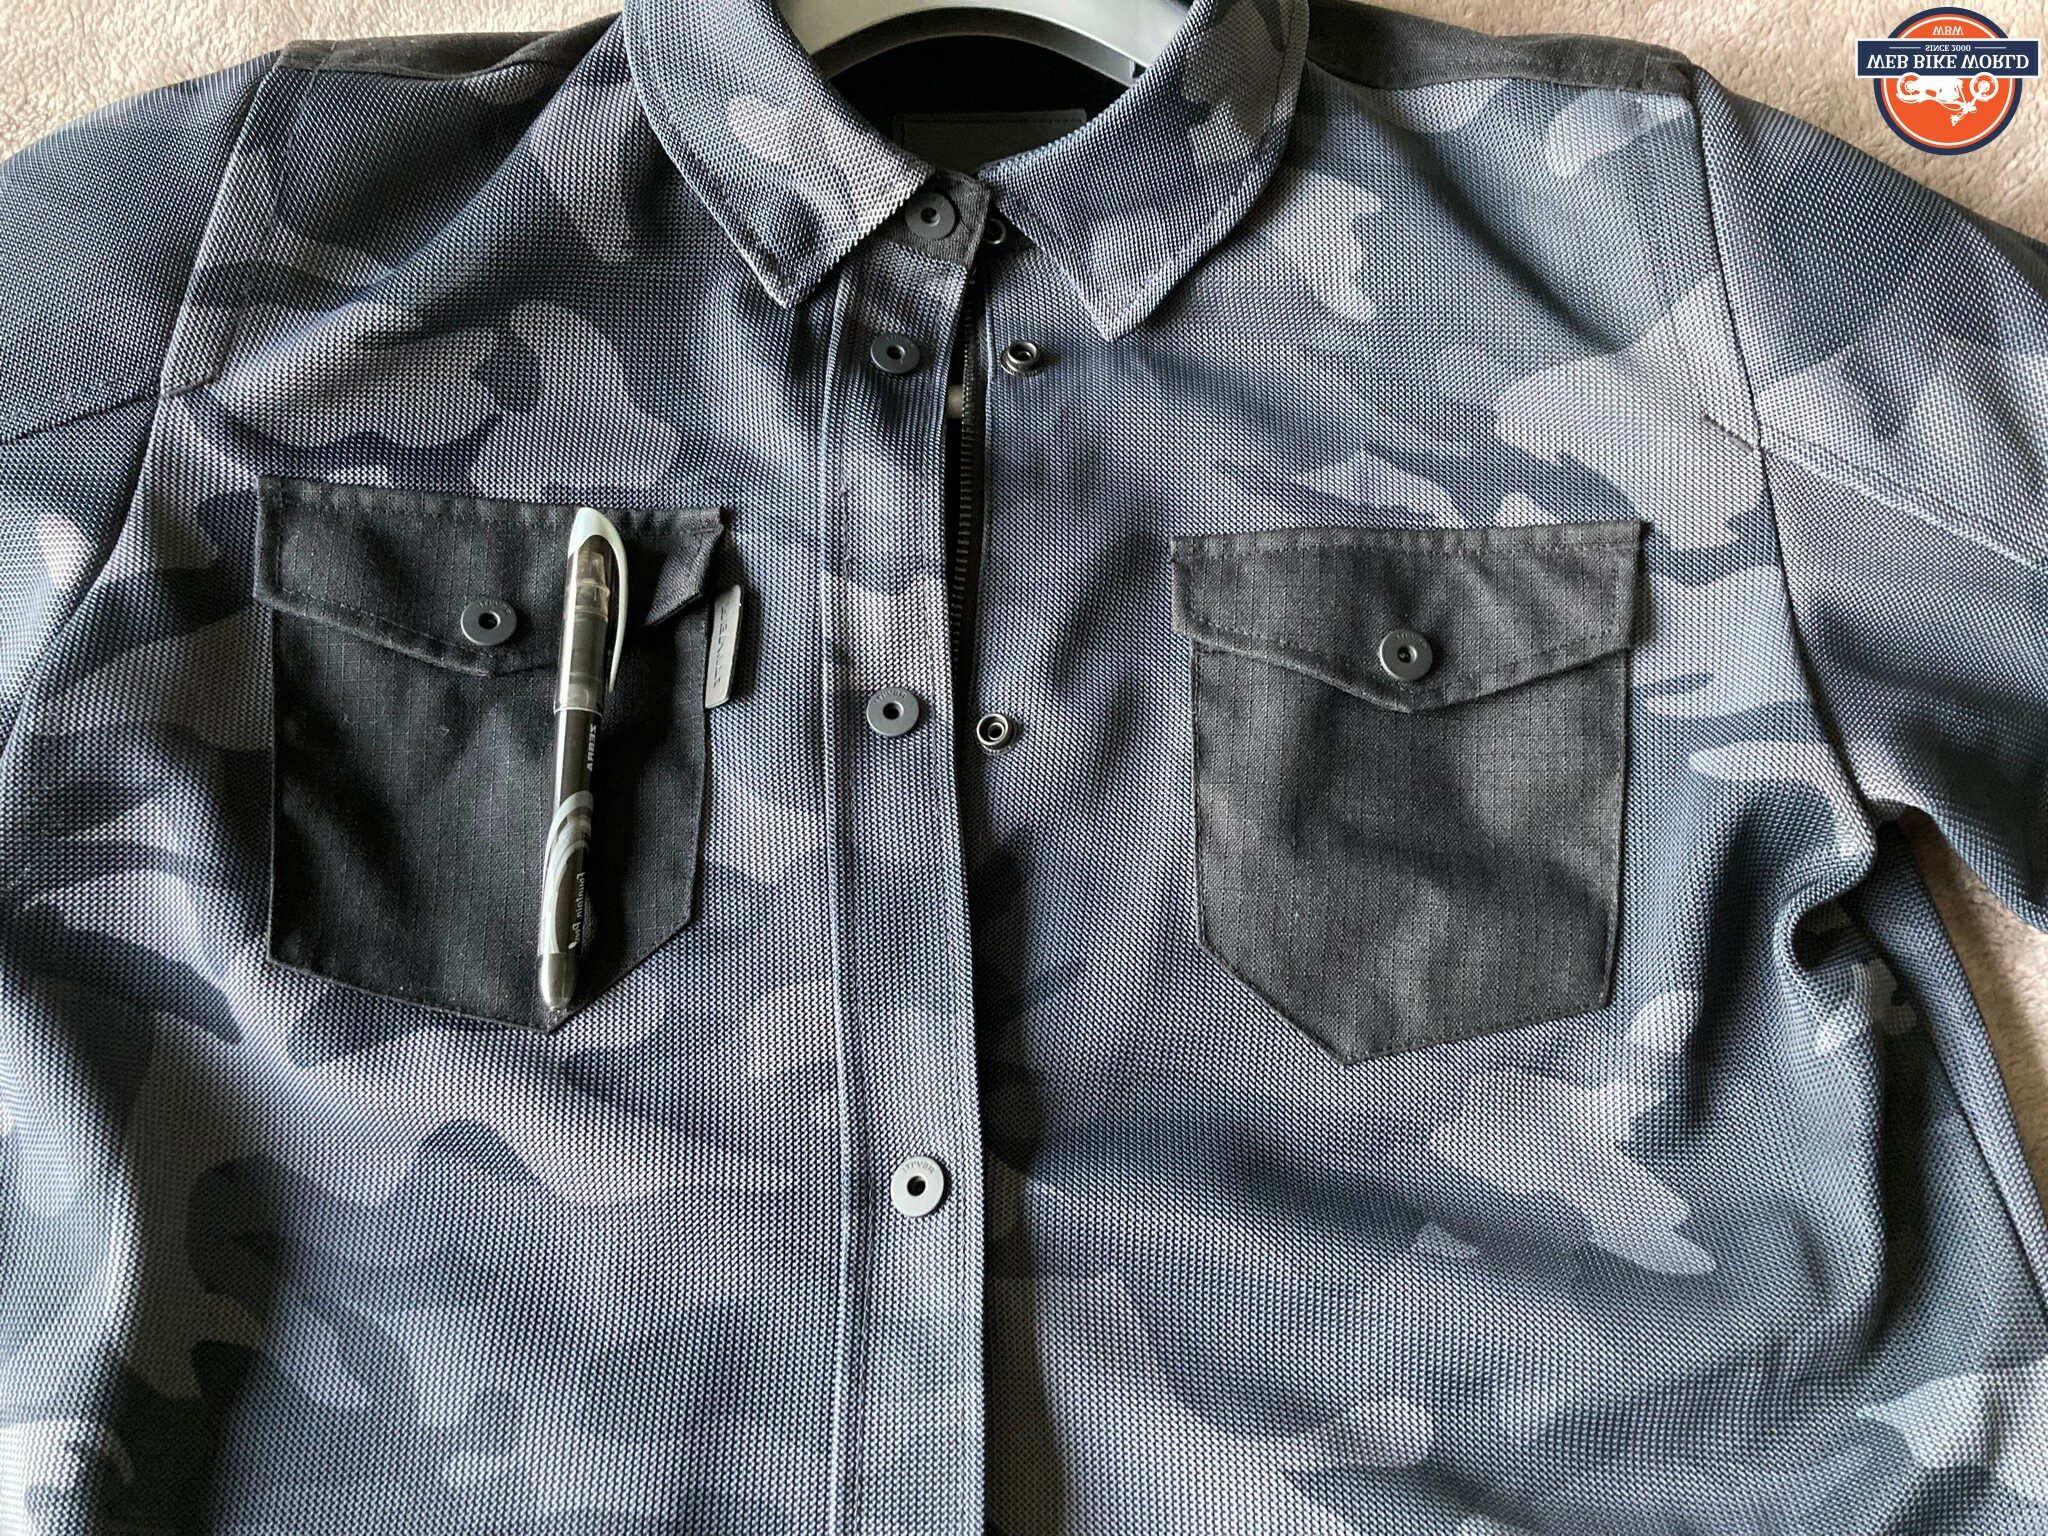 2 front pocket patches on the overshirt